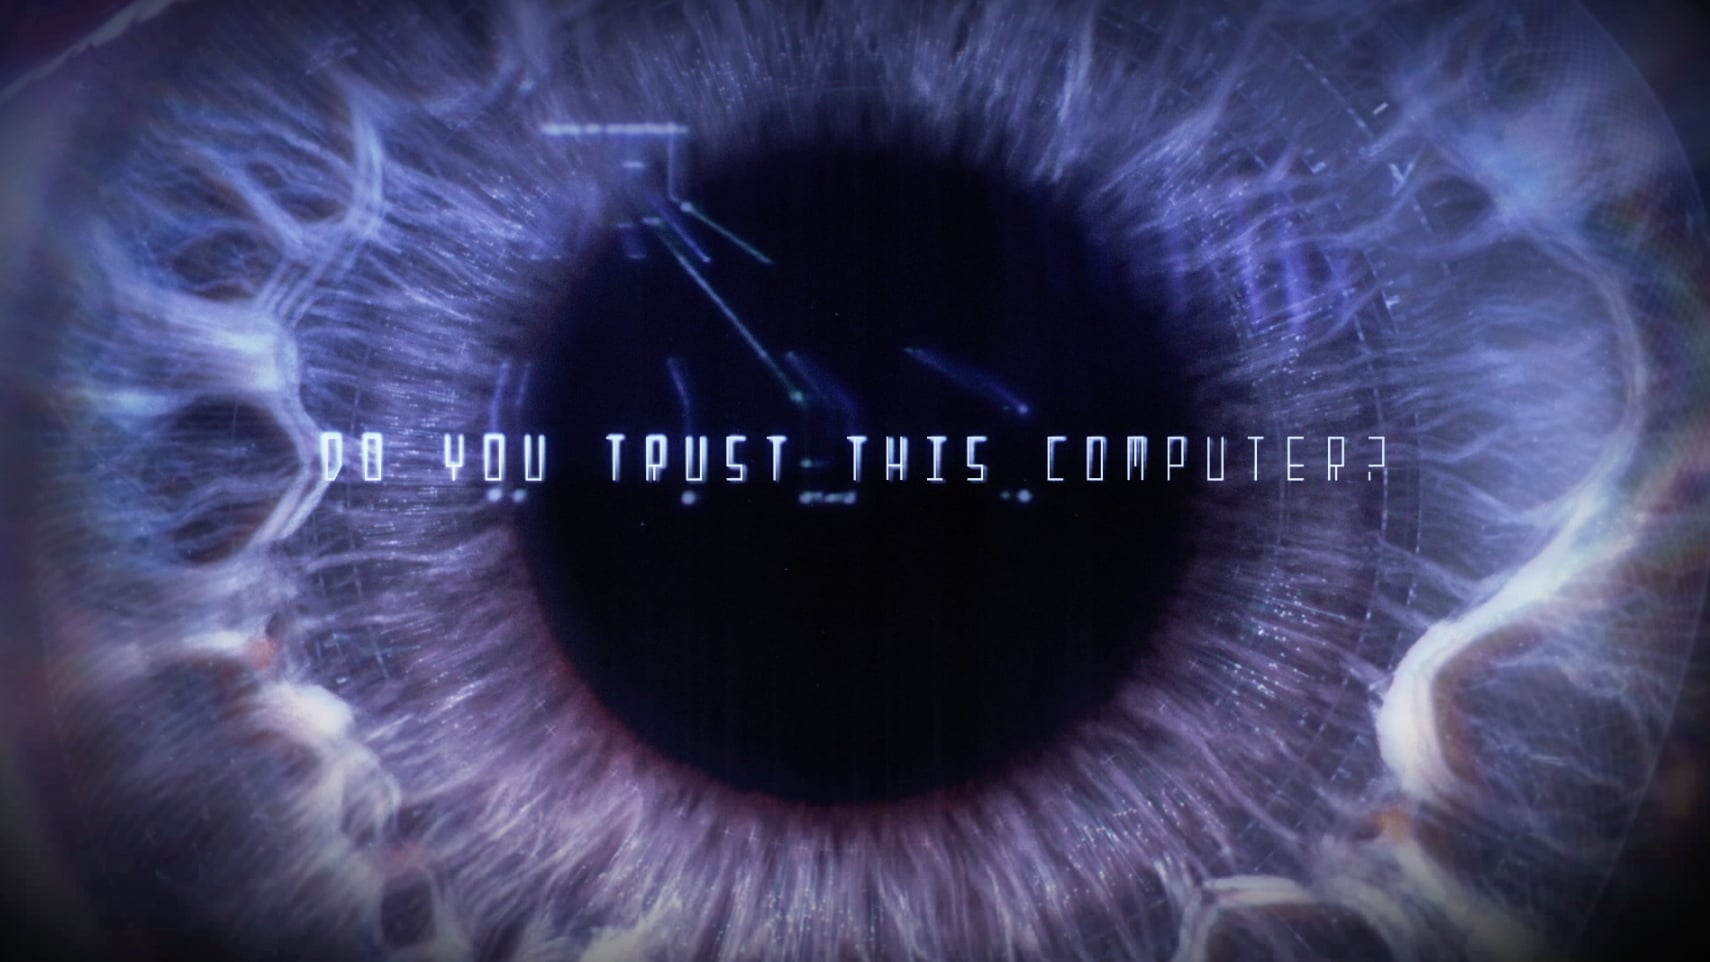 DO YOU TRUST THIS COMPUTER?